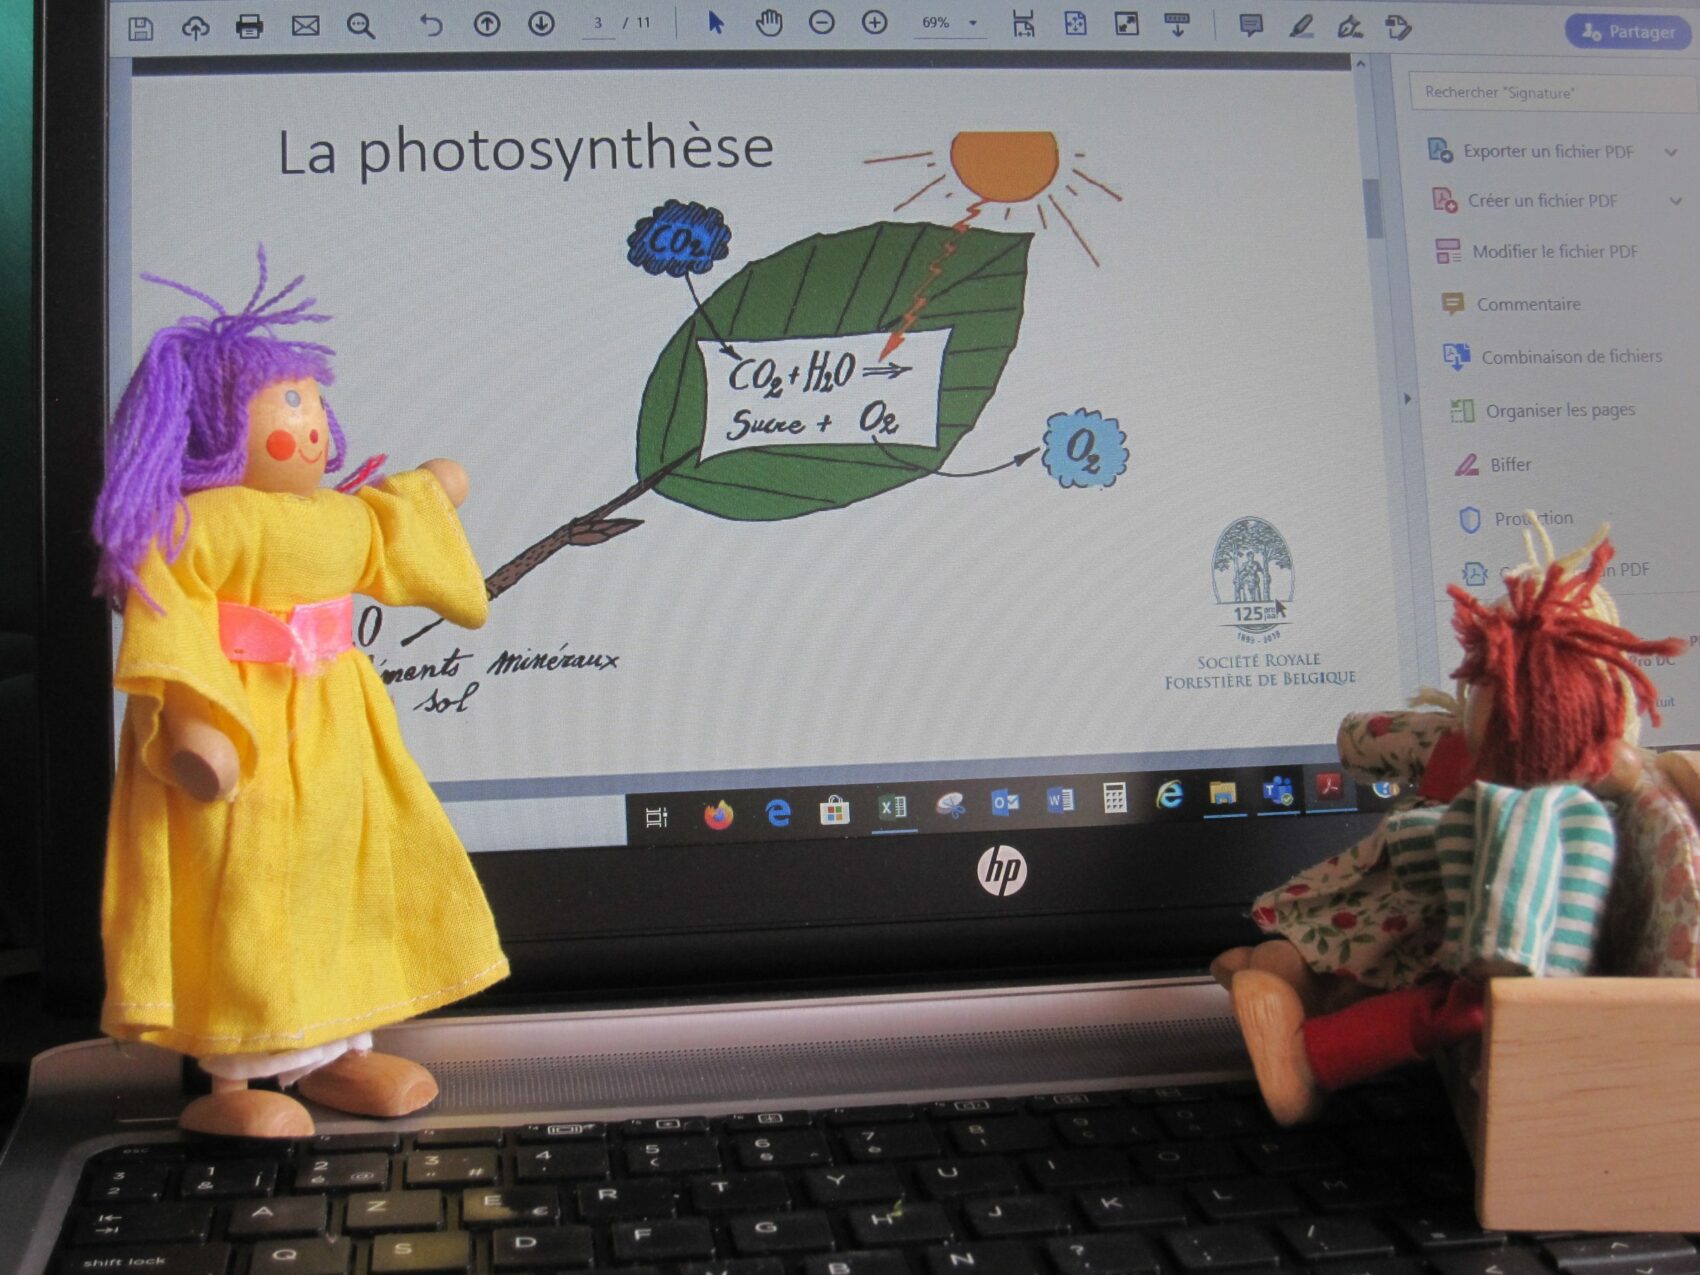 Photosynthesis game